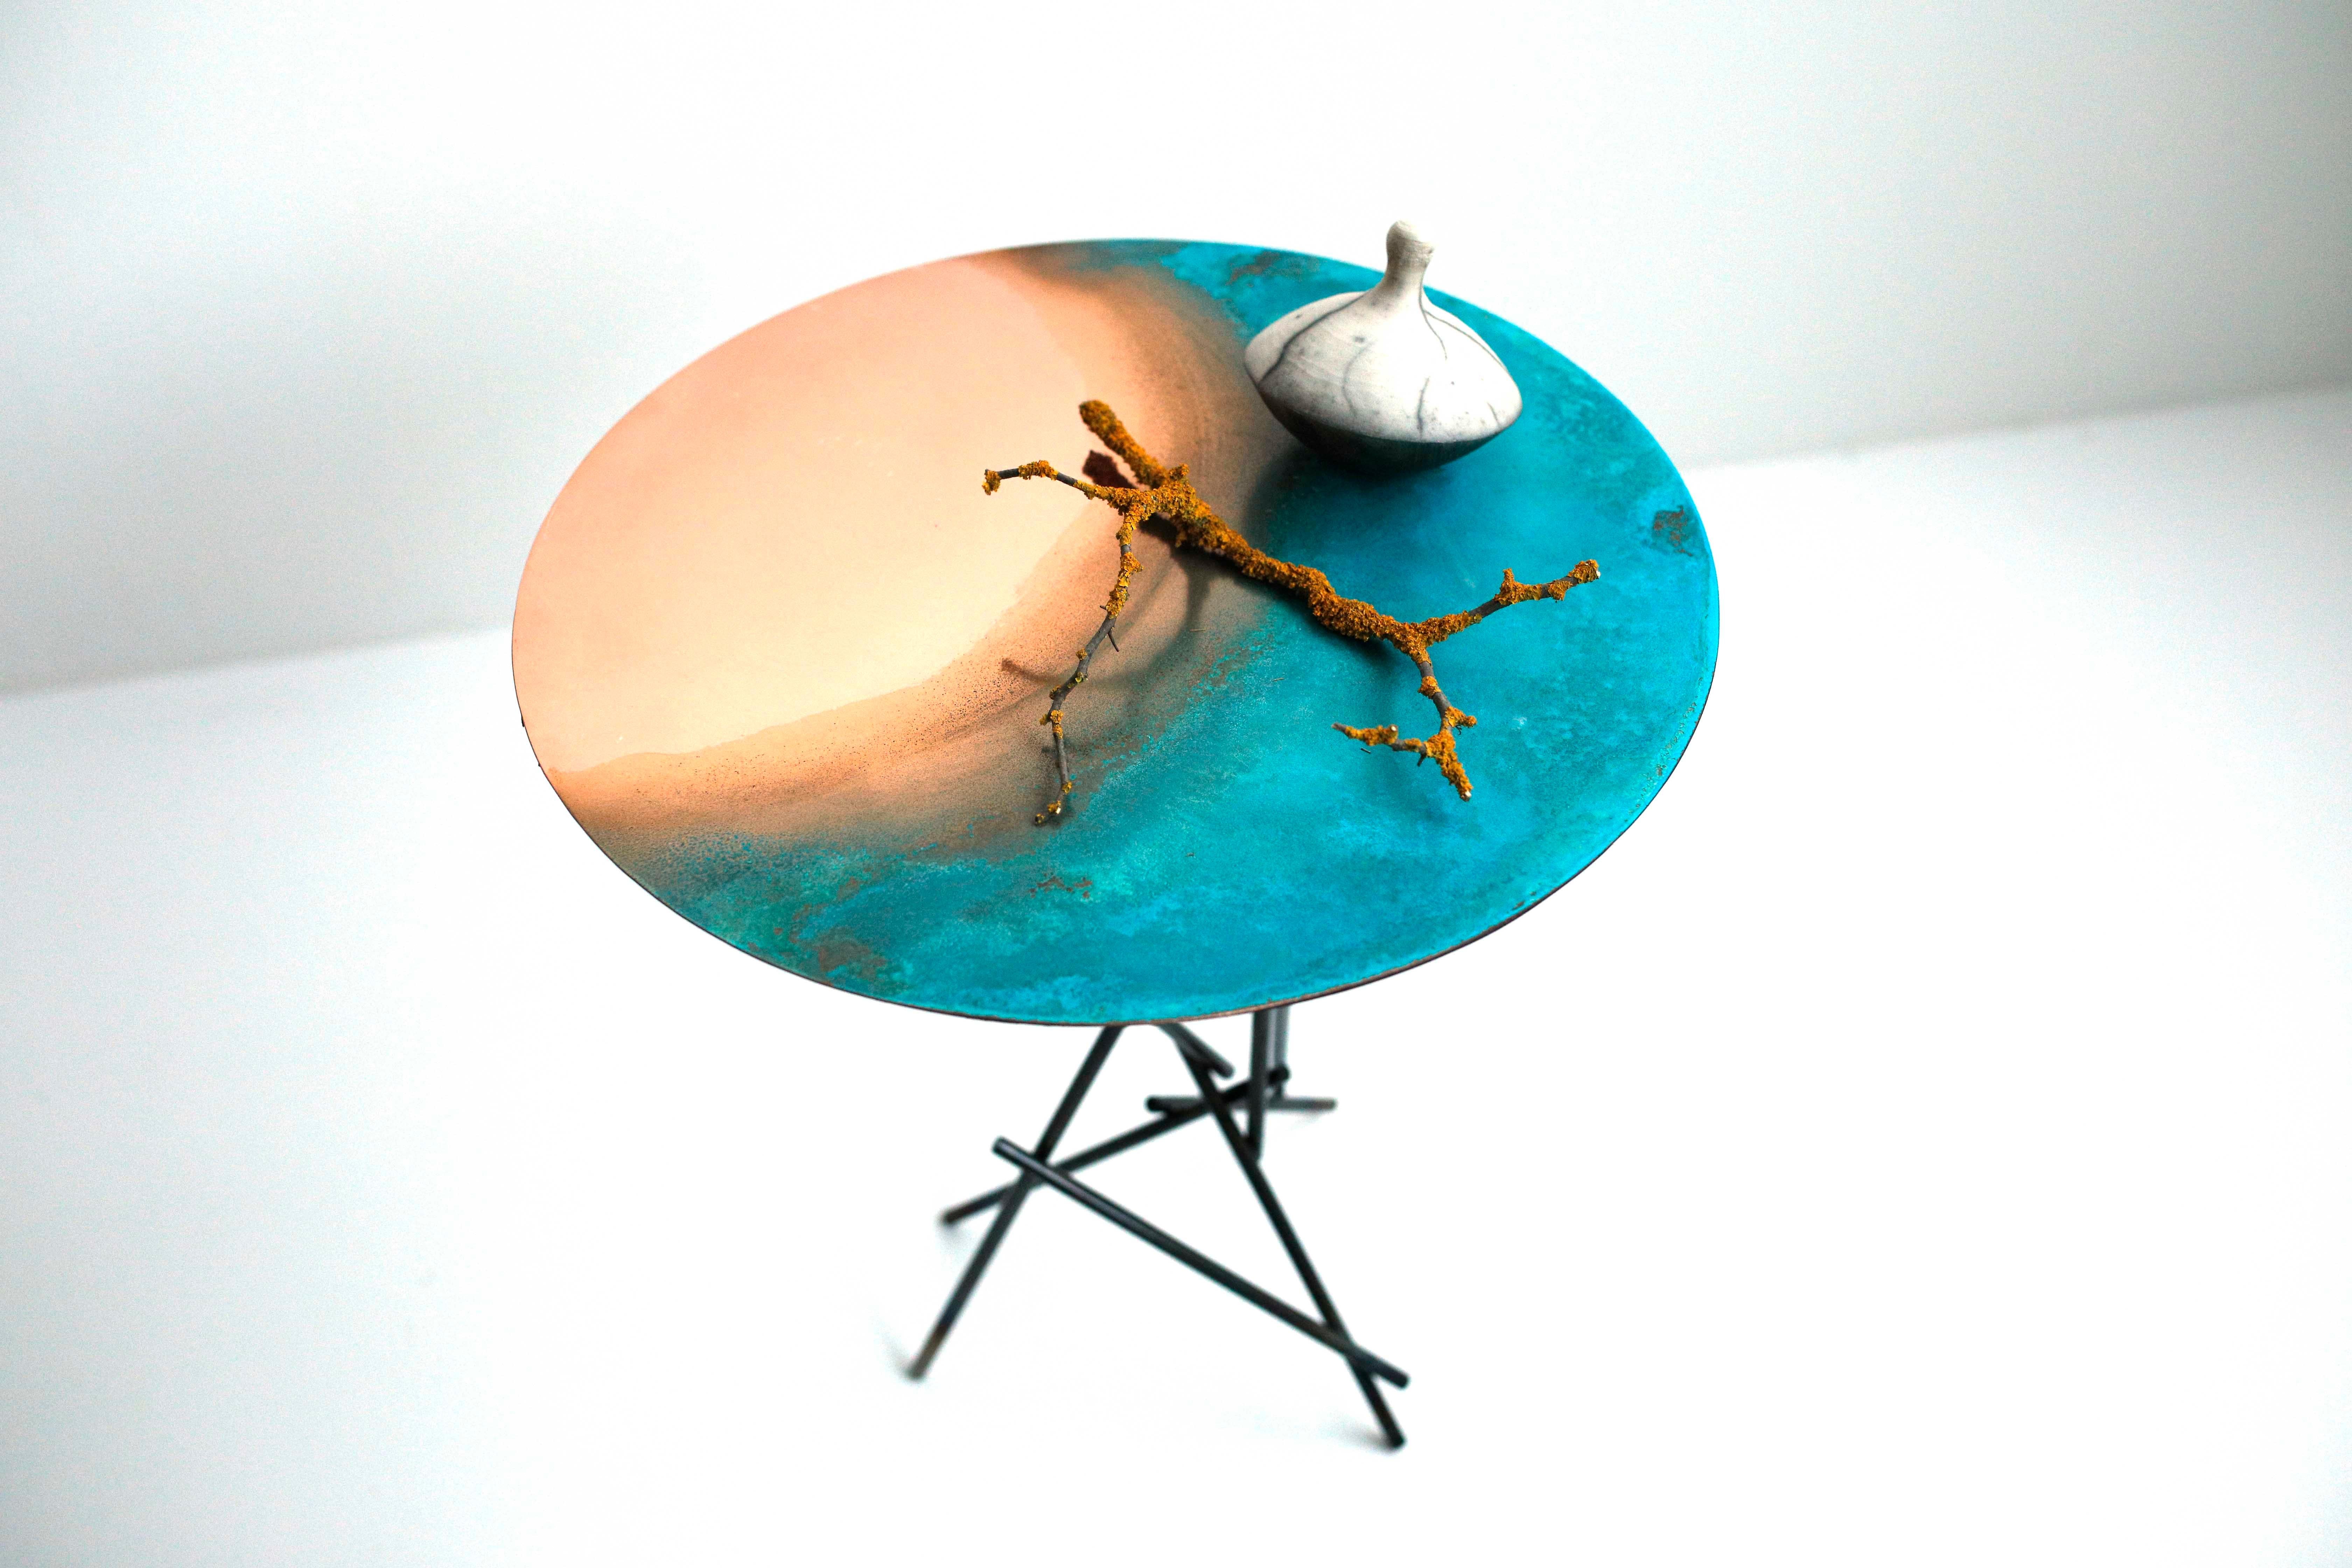 Italian Copper Hand-Sculpted Side Table by Samuel Costantini